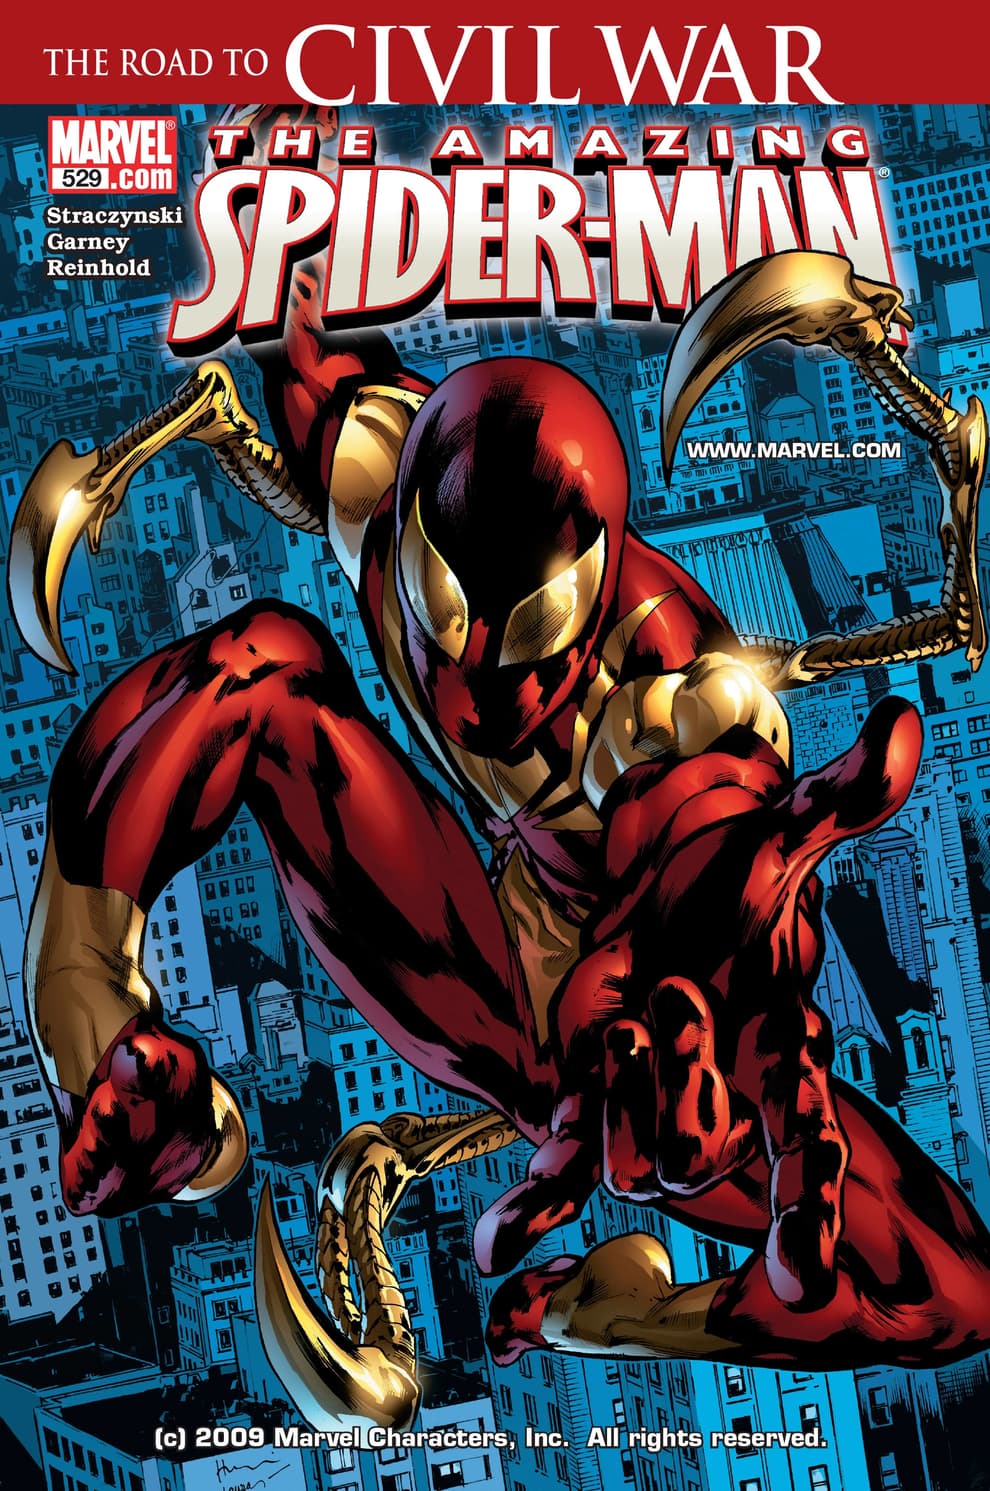 AMAZING SPIDER-MAN (1999) #529 cover by Bryan Hitch and Laura Martin